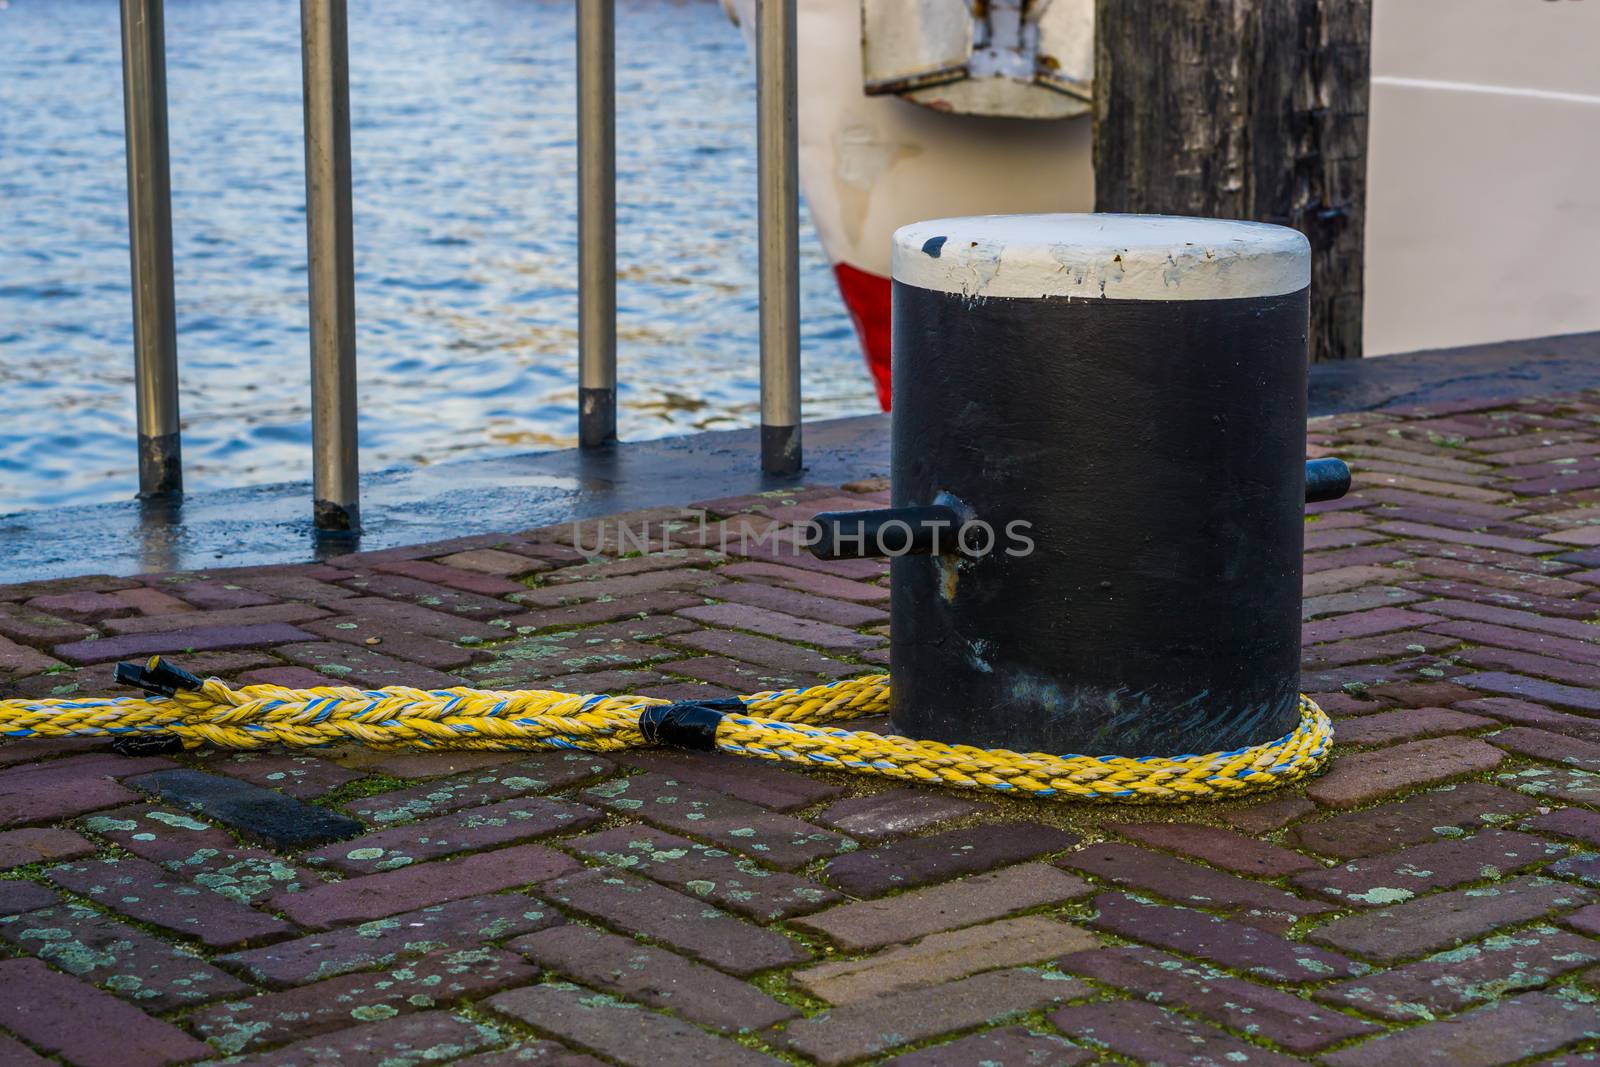 Docking pole with a rope to secure the boat, equipment at the harbor, water transportation background